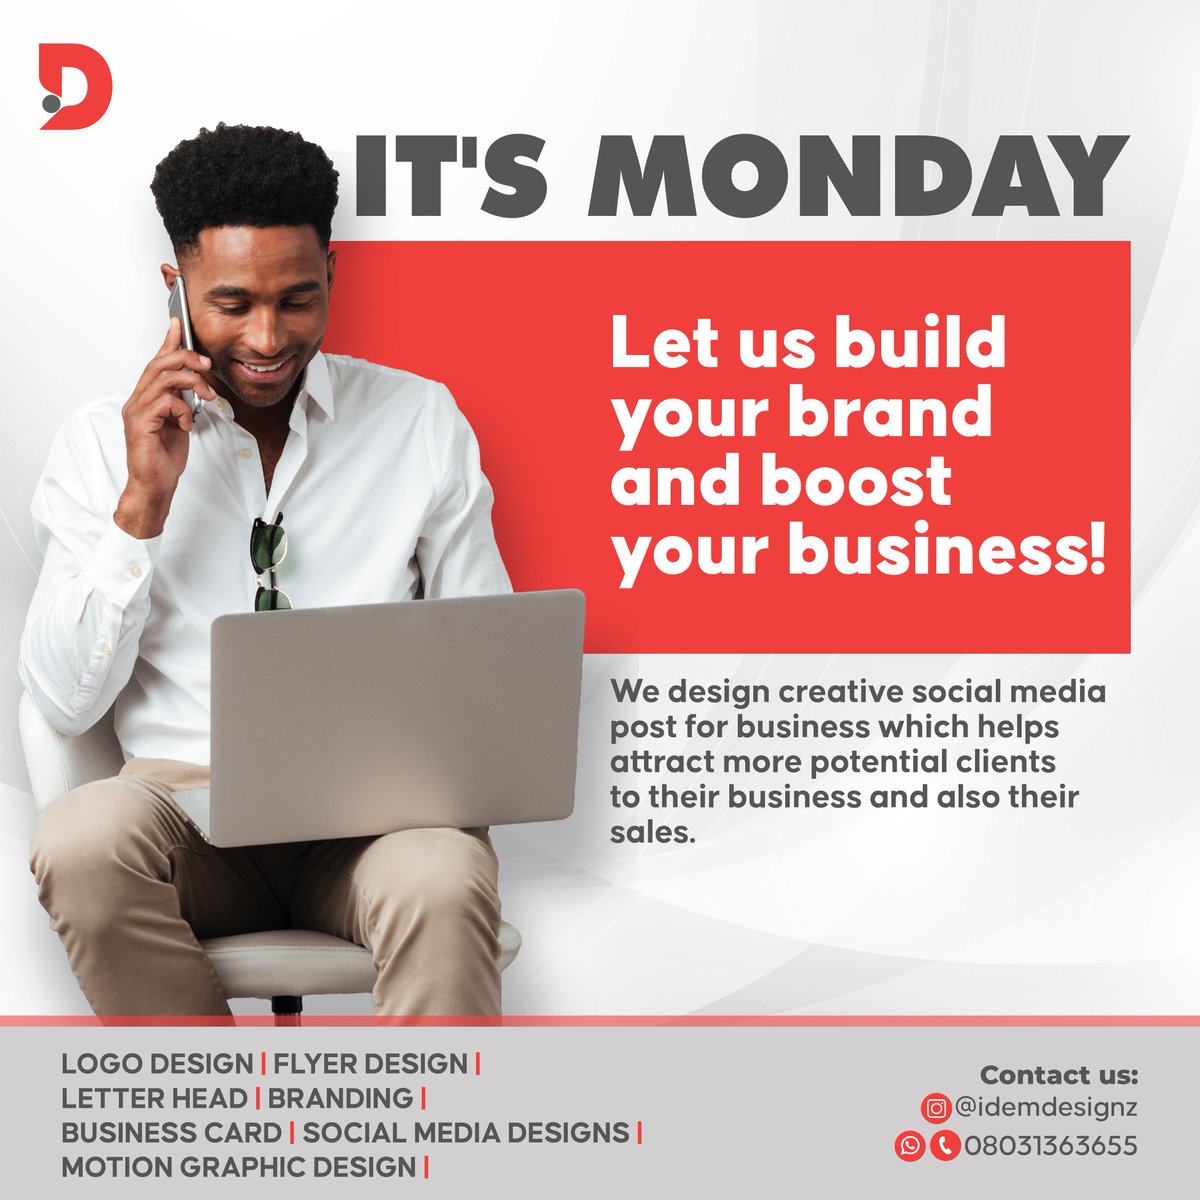 It's a new week! Let's help put your brand on the edge with catchy and creative designs. We got you covered. Give us a call or a DM on WhatsApp: 08031363655 IG: @idemdesignz Kindly repost!🙏🏽